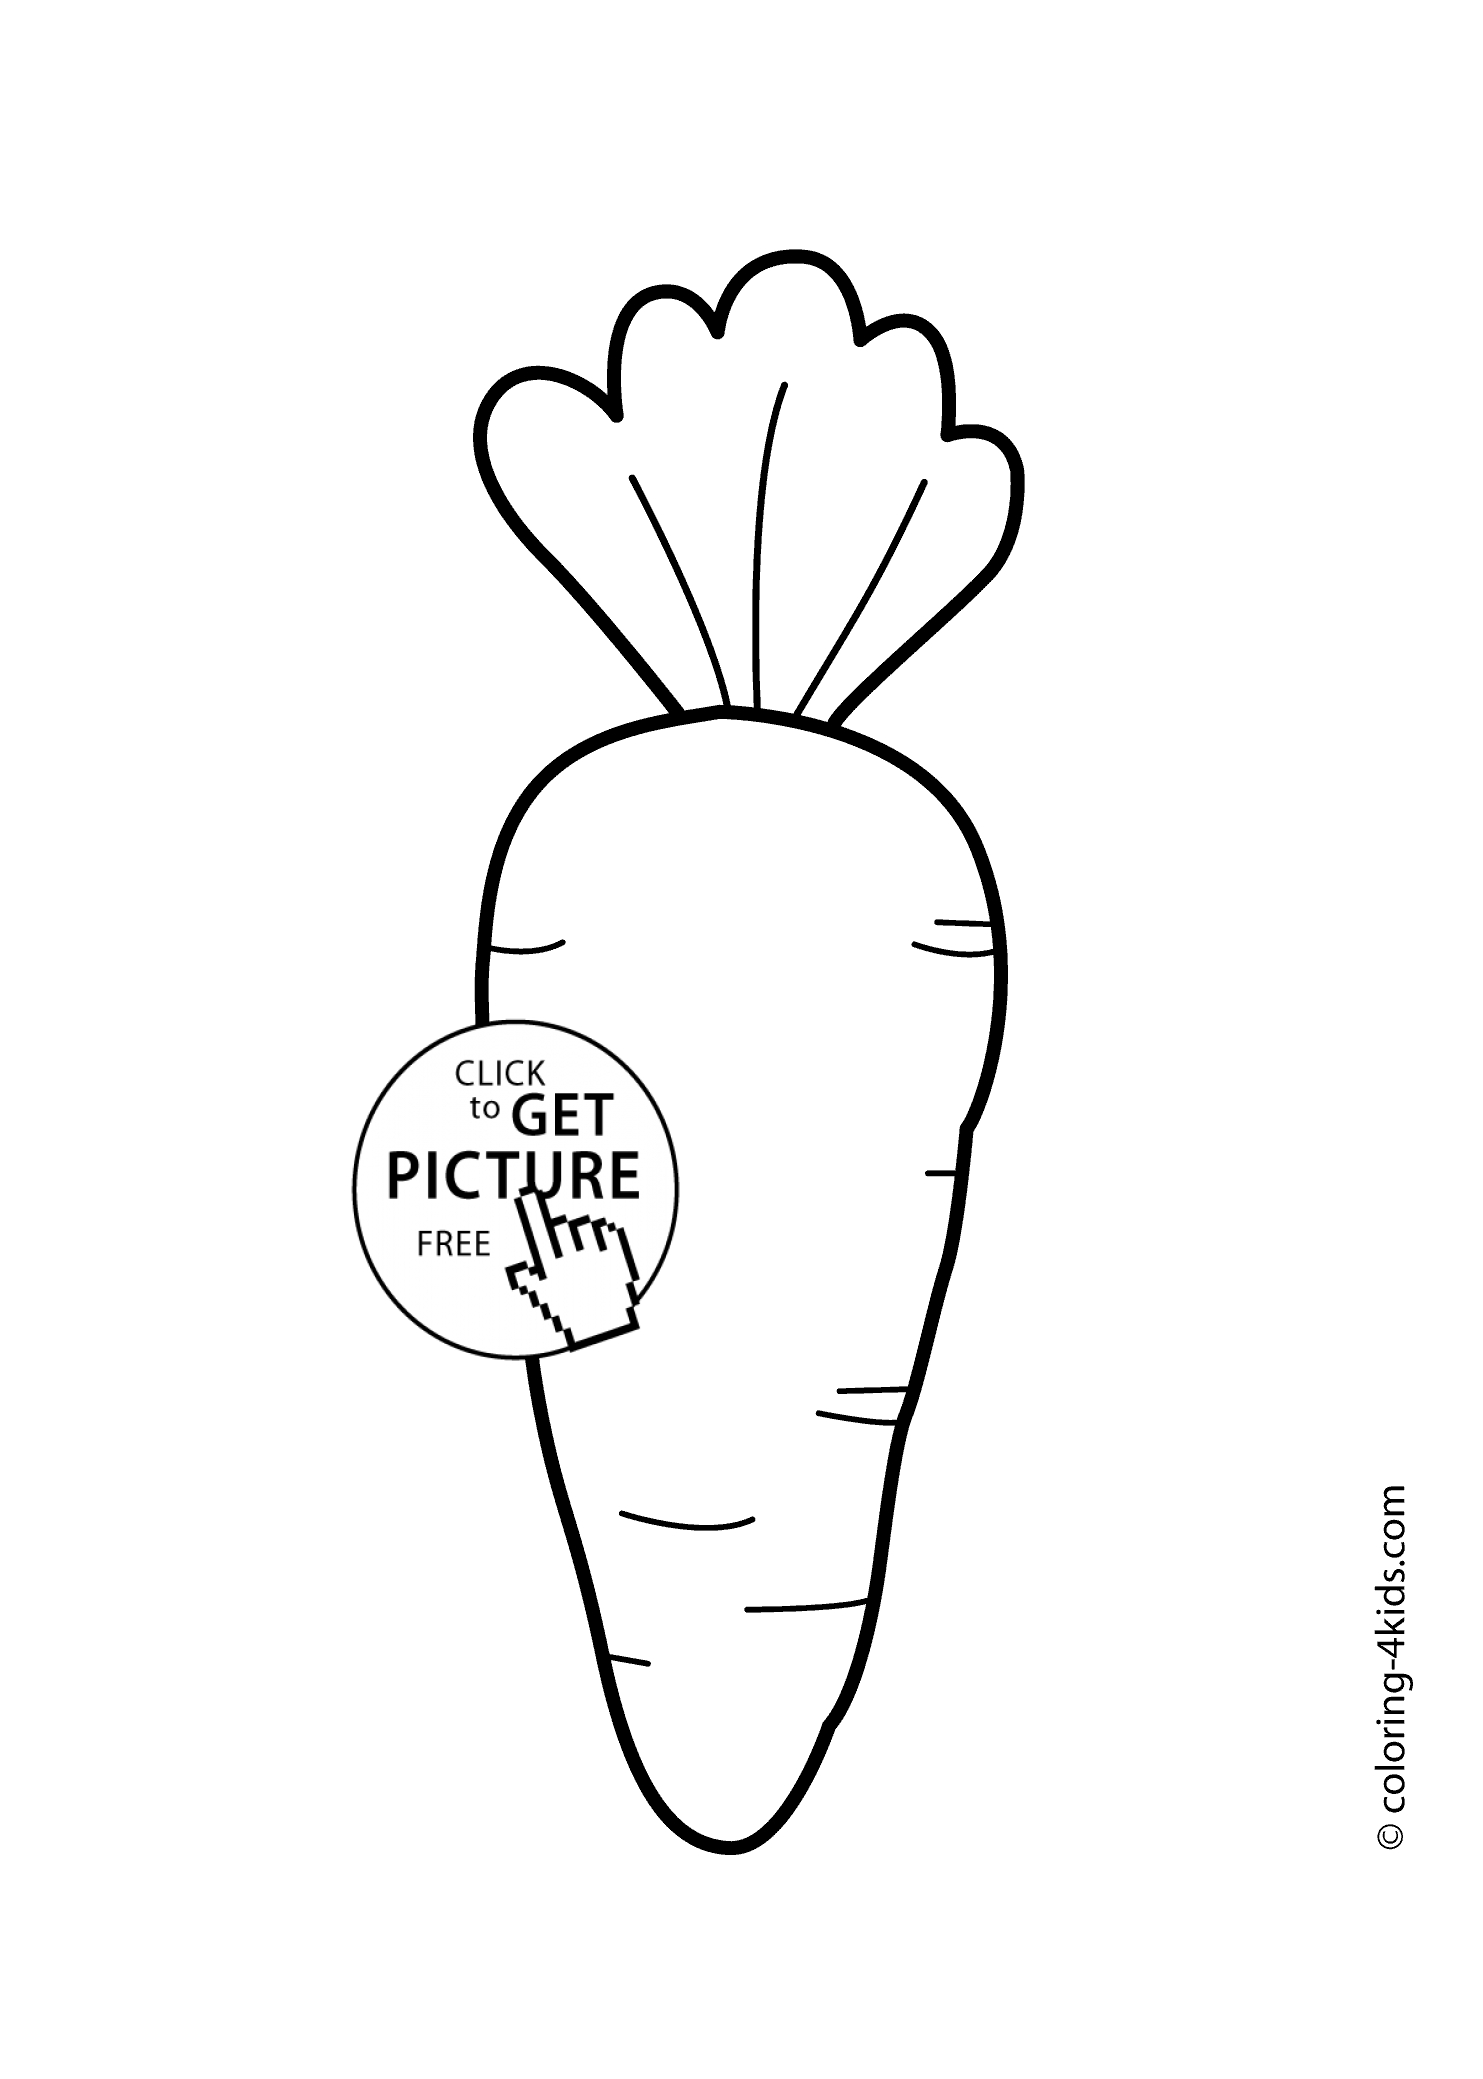 Free Coloring Pages Of Leaves Carrot With Leaves Vegetables Coloring Pages For Kids Printable Free